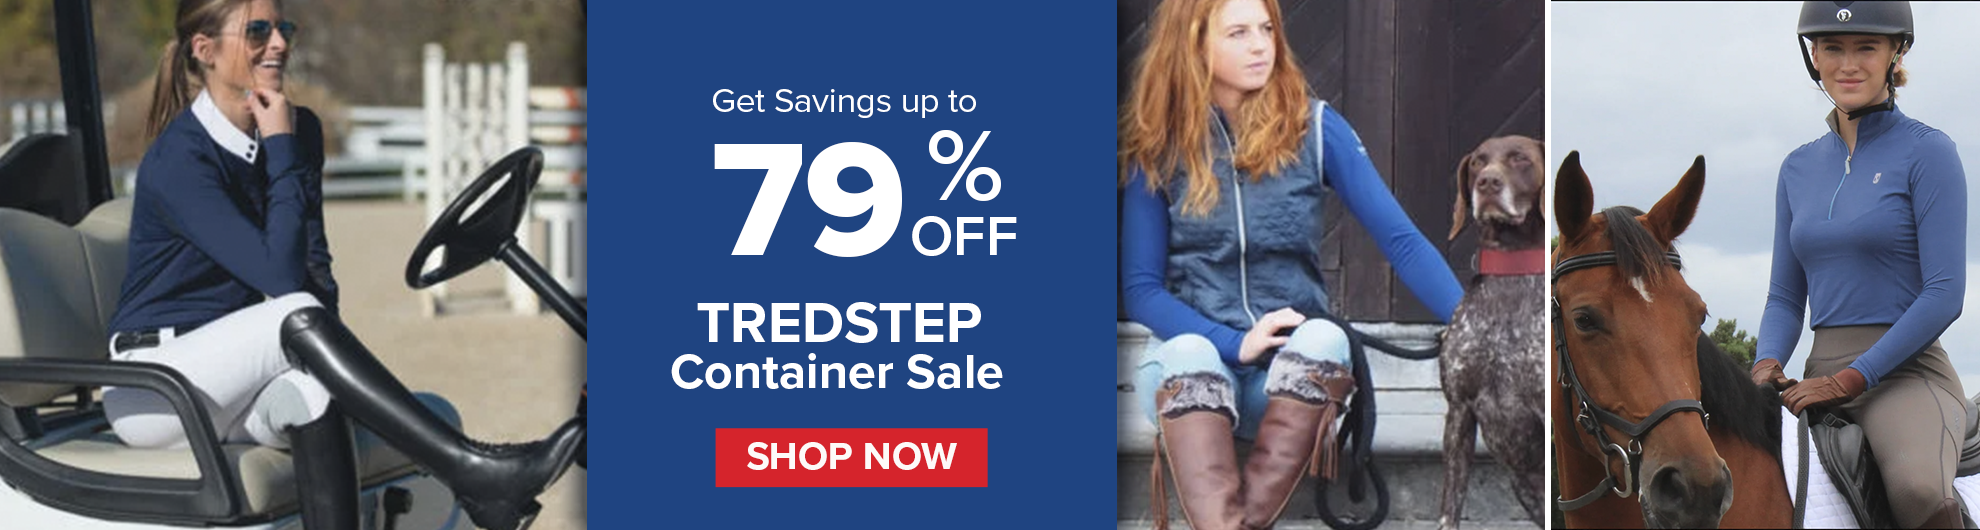 Tredstep Container Sale